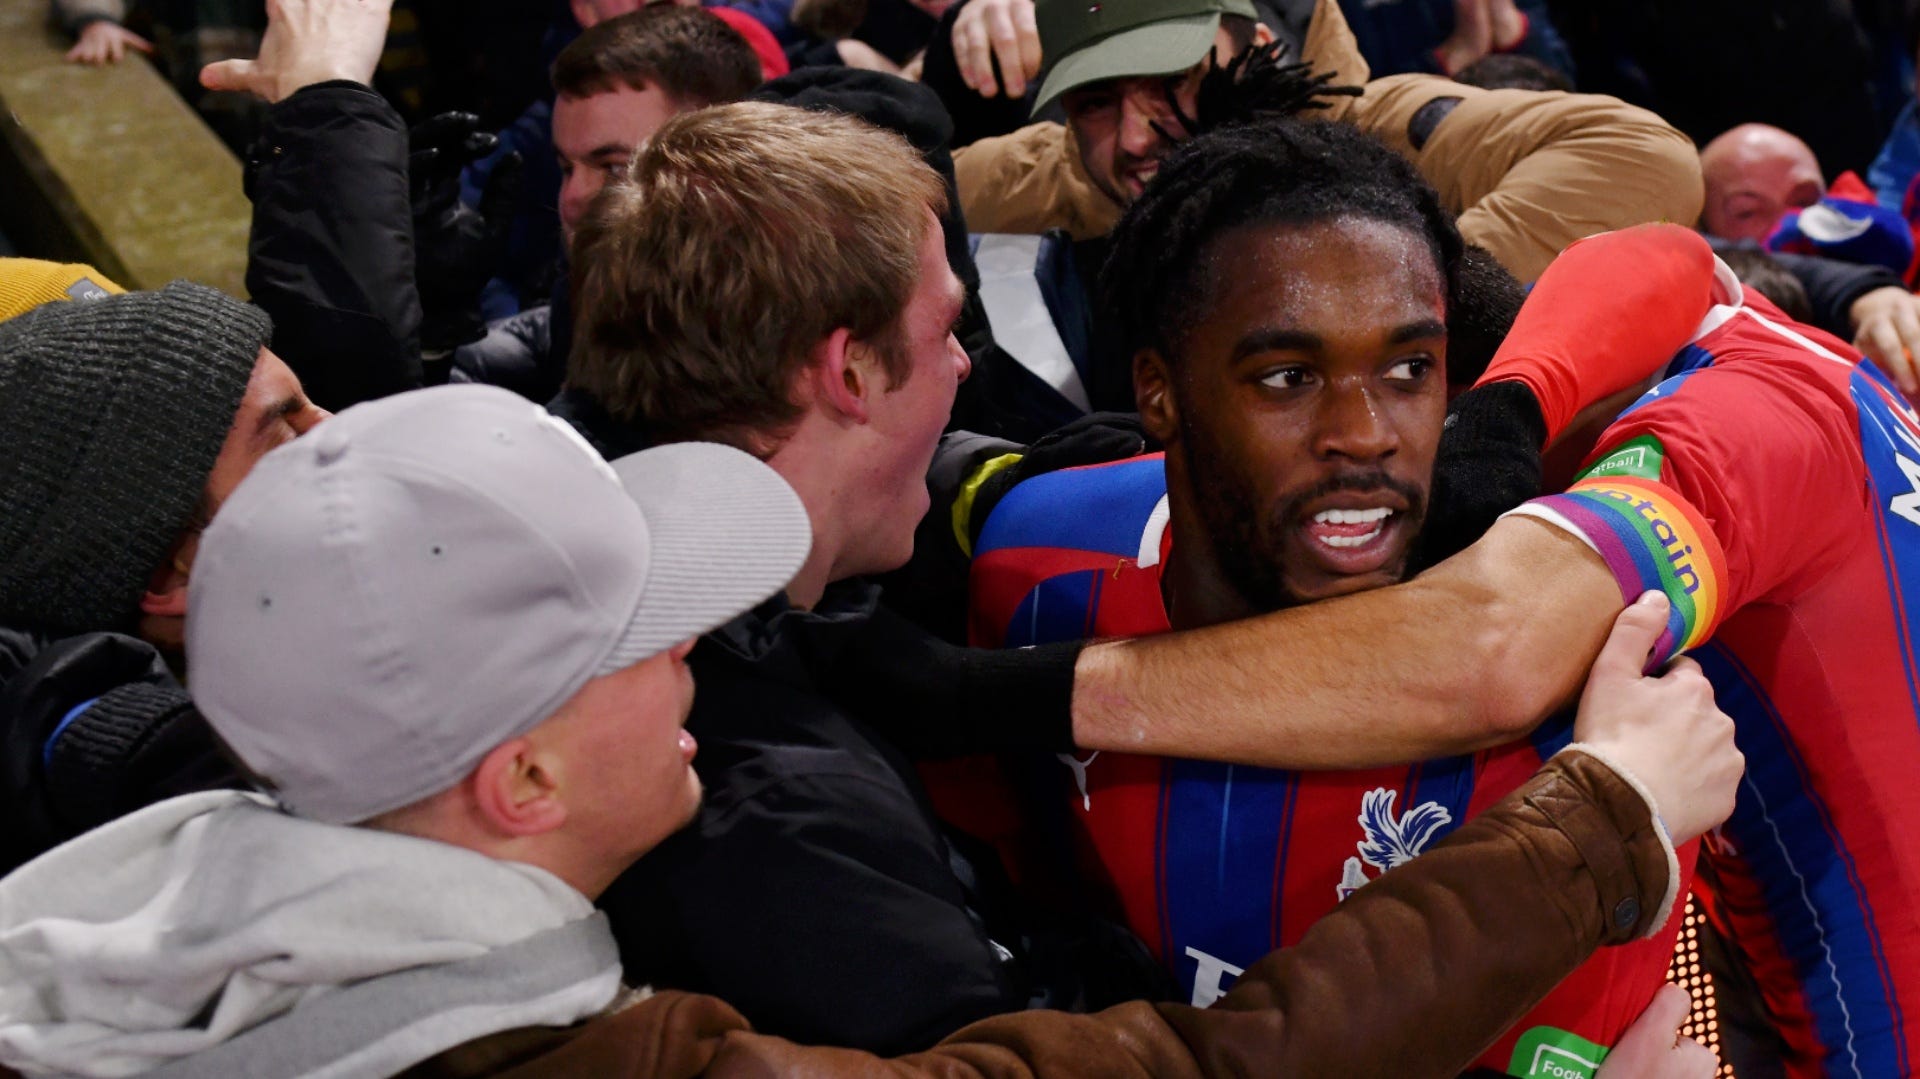  Jeffrey Schlupp celebrates scoring a spectacular goal against Manchester City, as ecstatic Crystal Palace fans erupt in joy in the background.